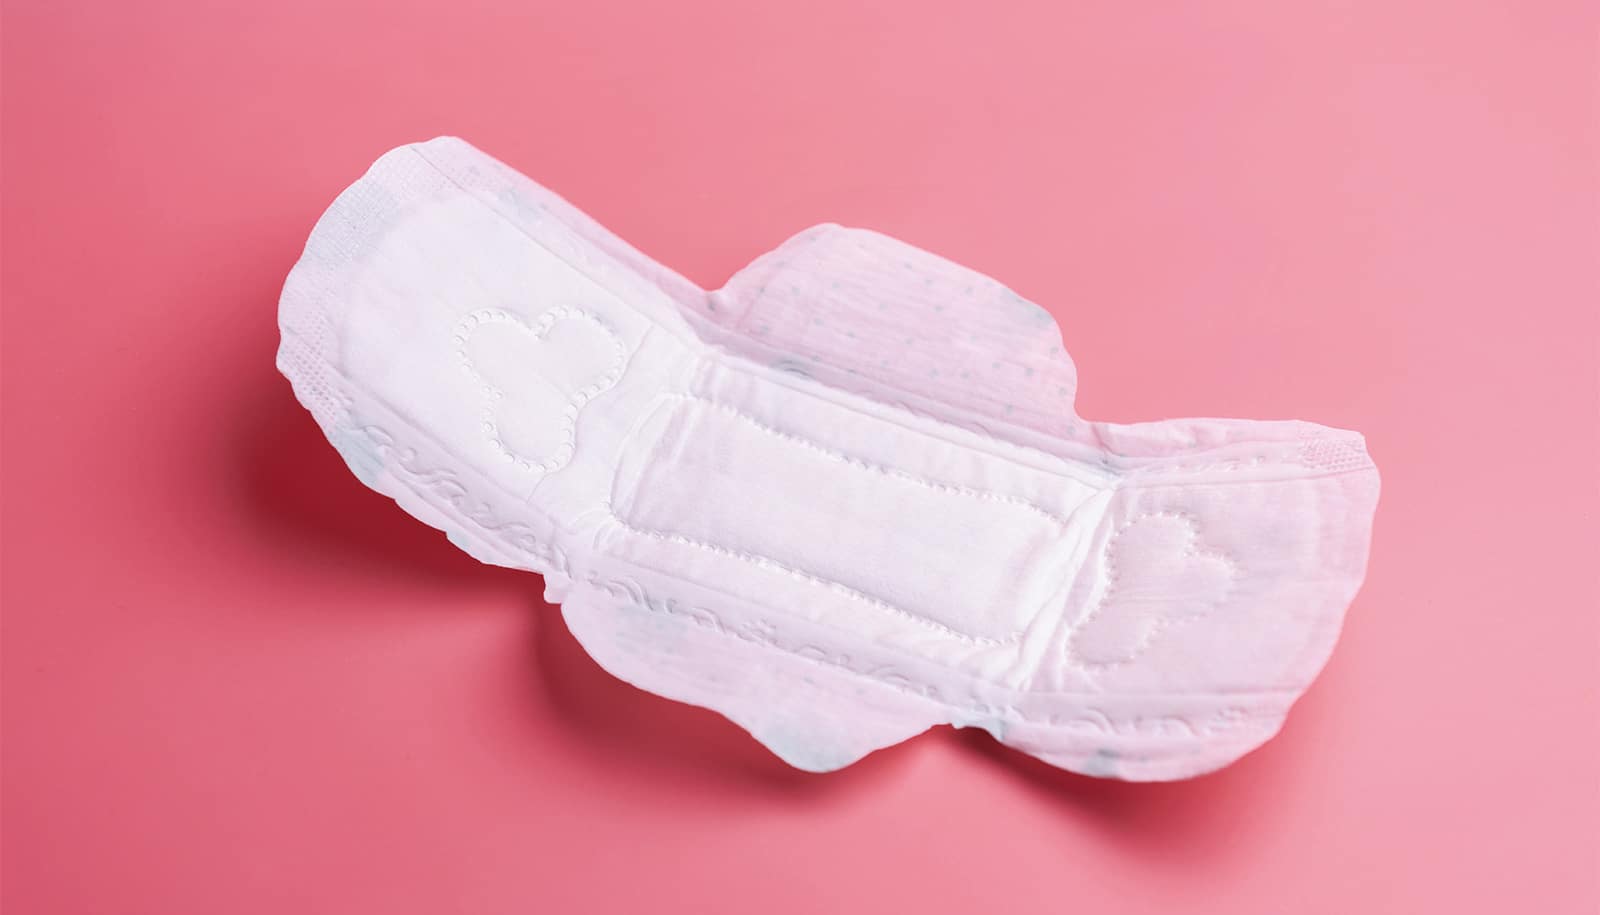 What To Know About PFAS Chemicals in Menstrual Products